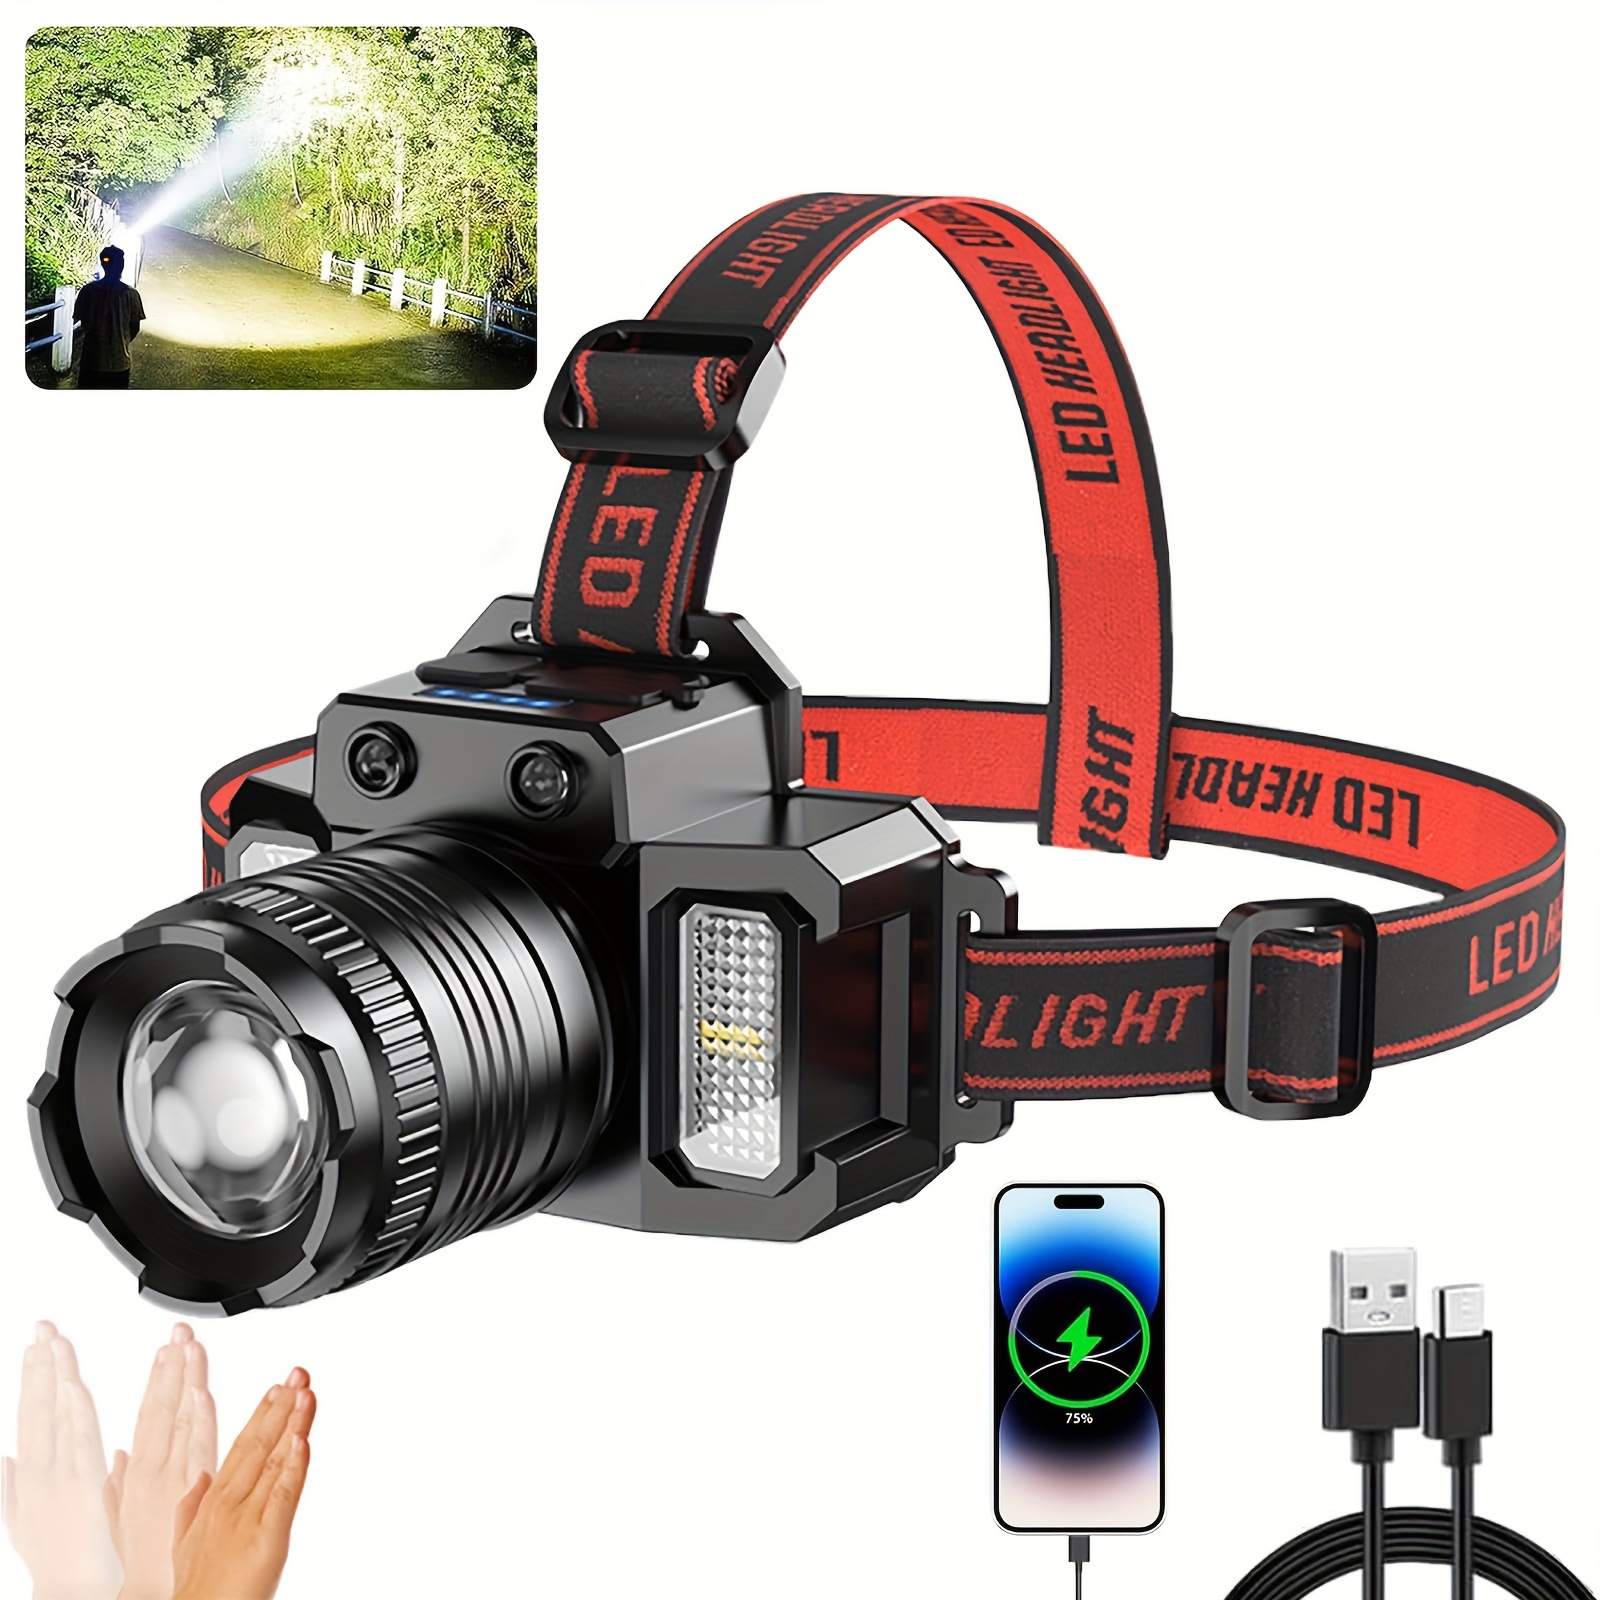 

Headlamp Rechargeable, Super Bright Head Lamp With Motion Sensor, 5 Lighting Modes Zoomable Head Lights For Forehead, 360° Adjustable Led Headlamp For Outdoor Hunting Camping Fishing Hiking